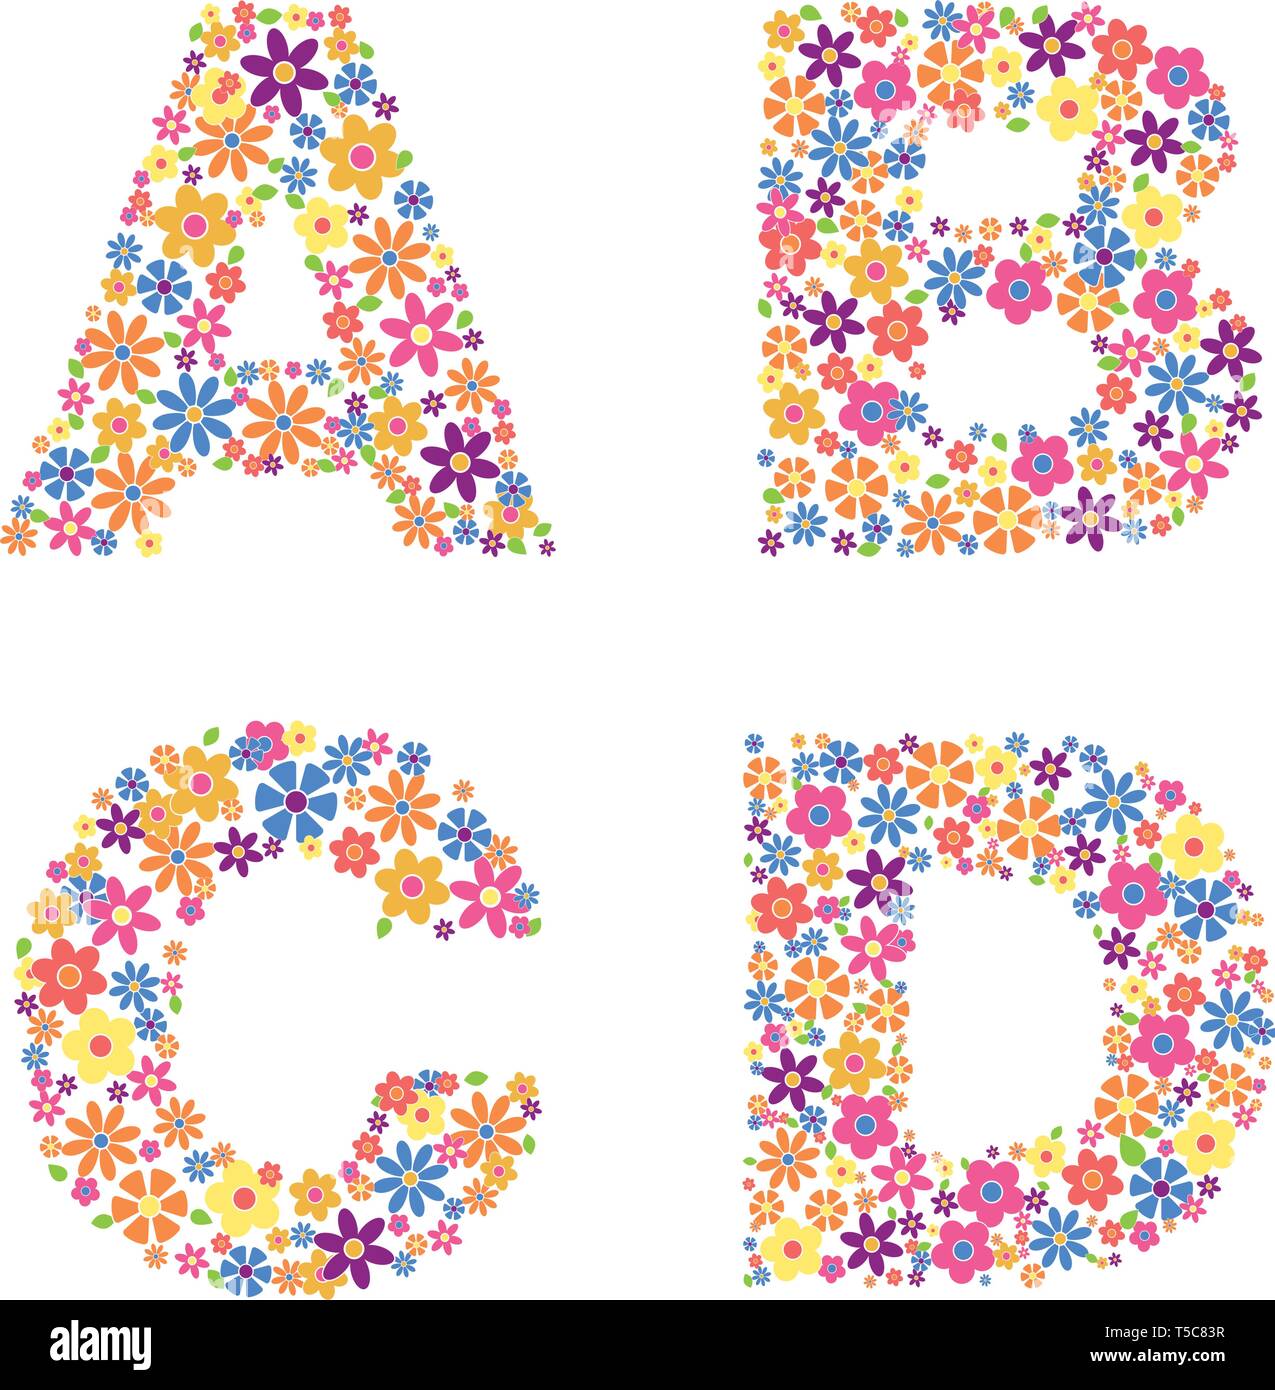 Alphabet part, letters A, B, C, D filled with a variety of colorful flowers isolated on white background vector illustration Stock Vector